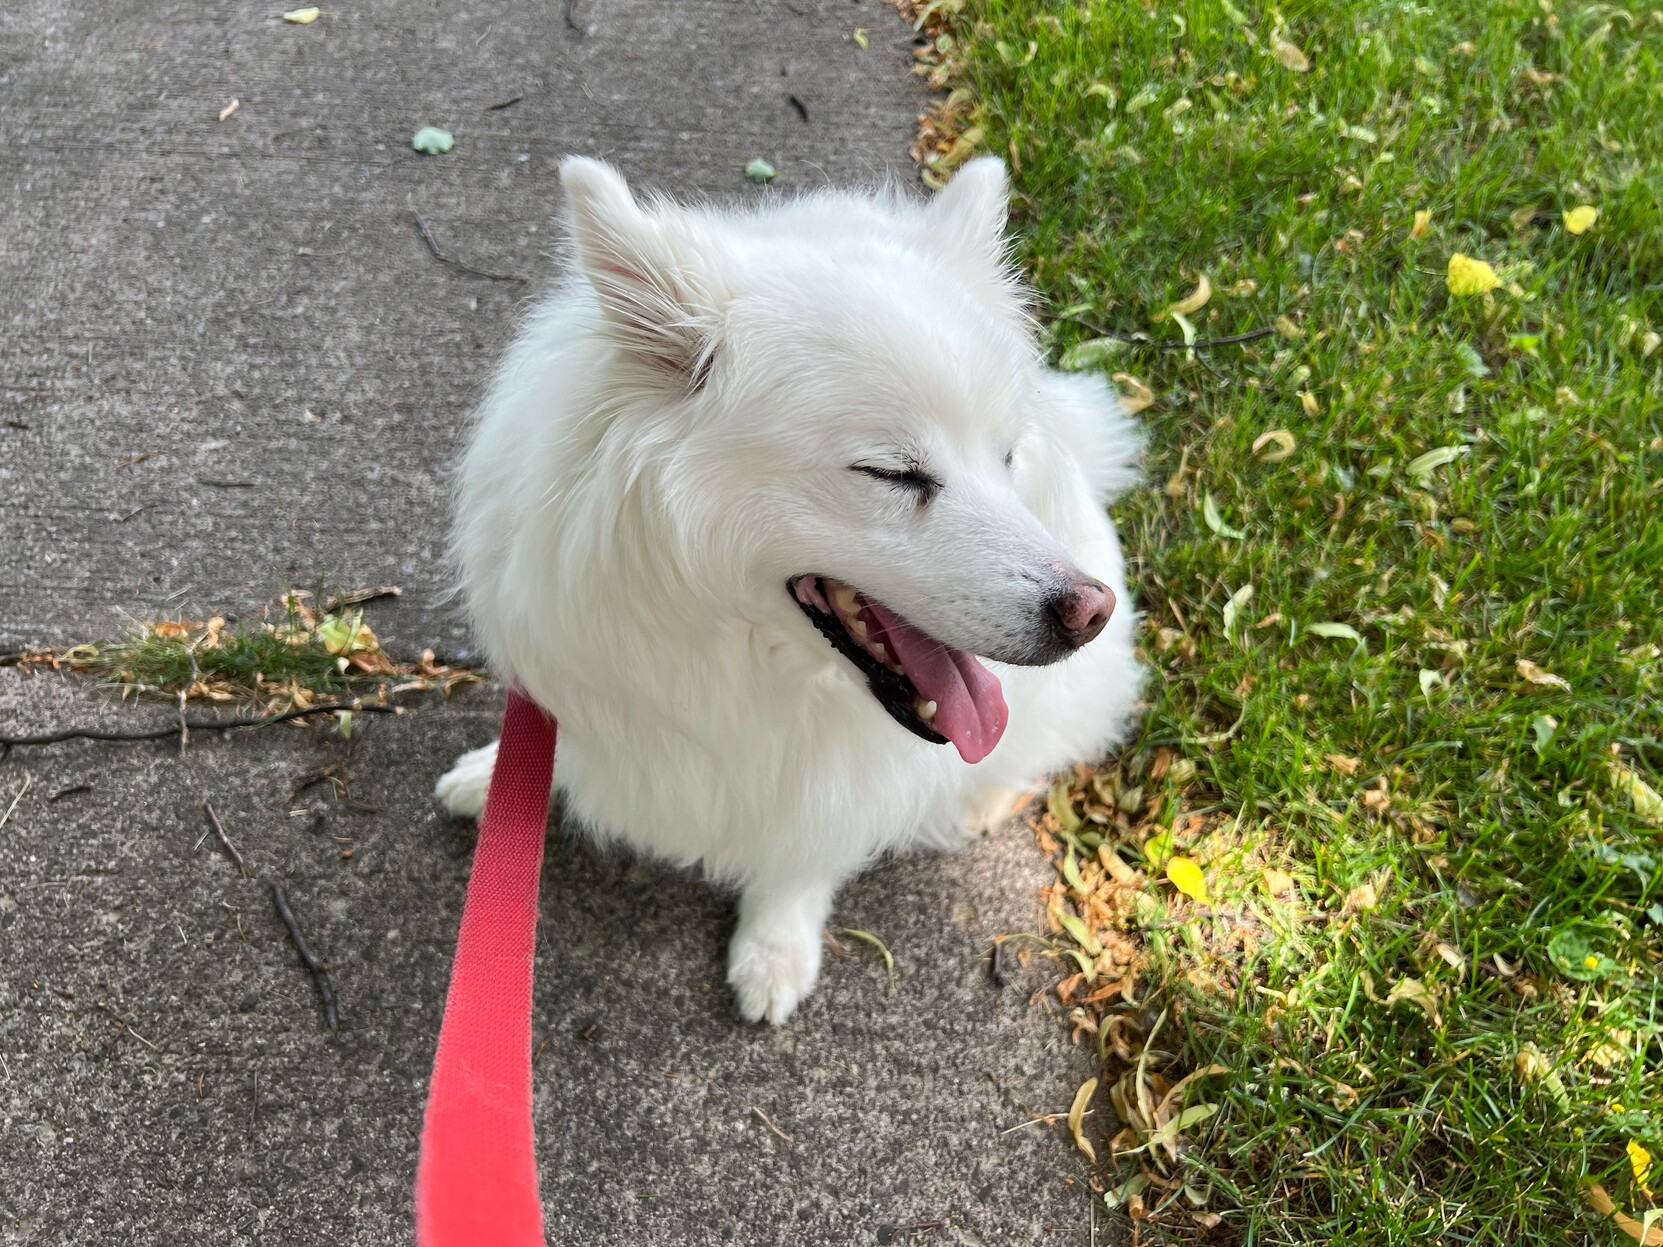 Clark is a very, very floofy white dog with a brown snout, black eyelashes, and pink ears and tongue. He is grinning with his eyes closed as he sits on some sidewalk next to some grass. 